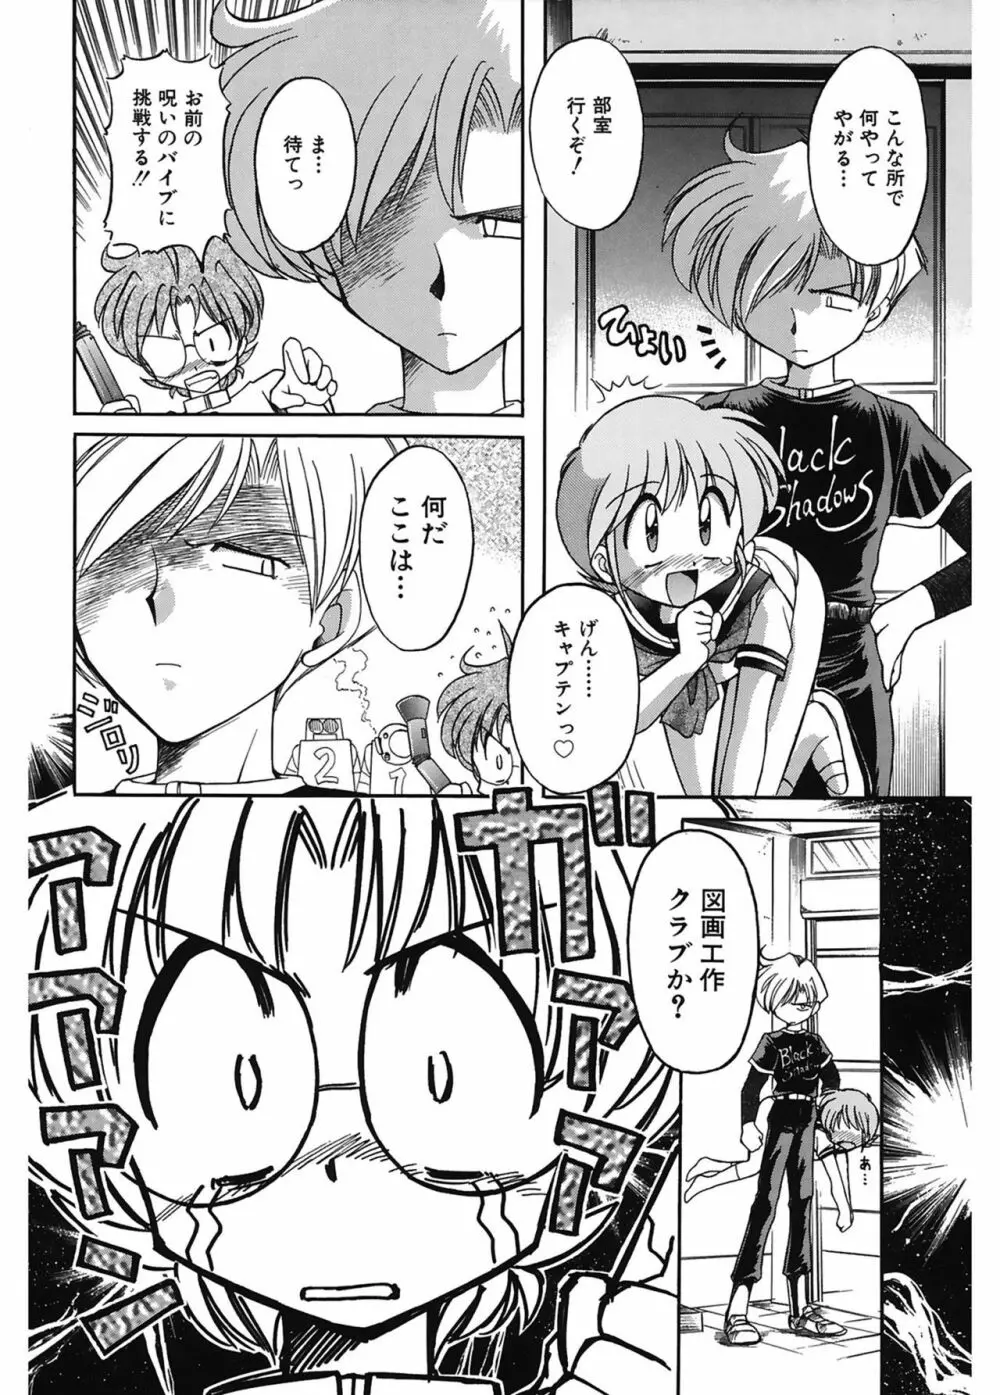 JACK UP featuring徳川玄徳 Page.108